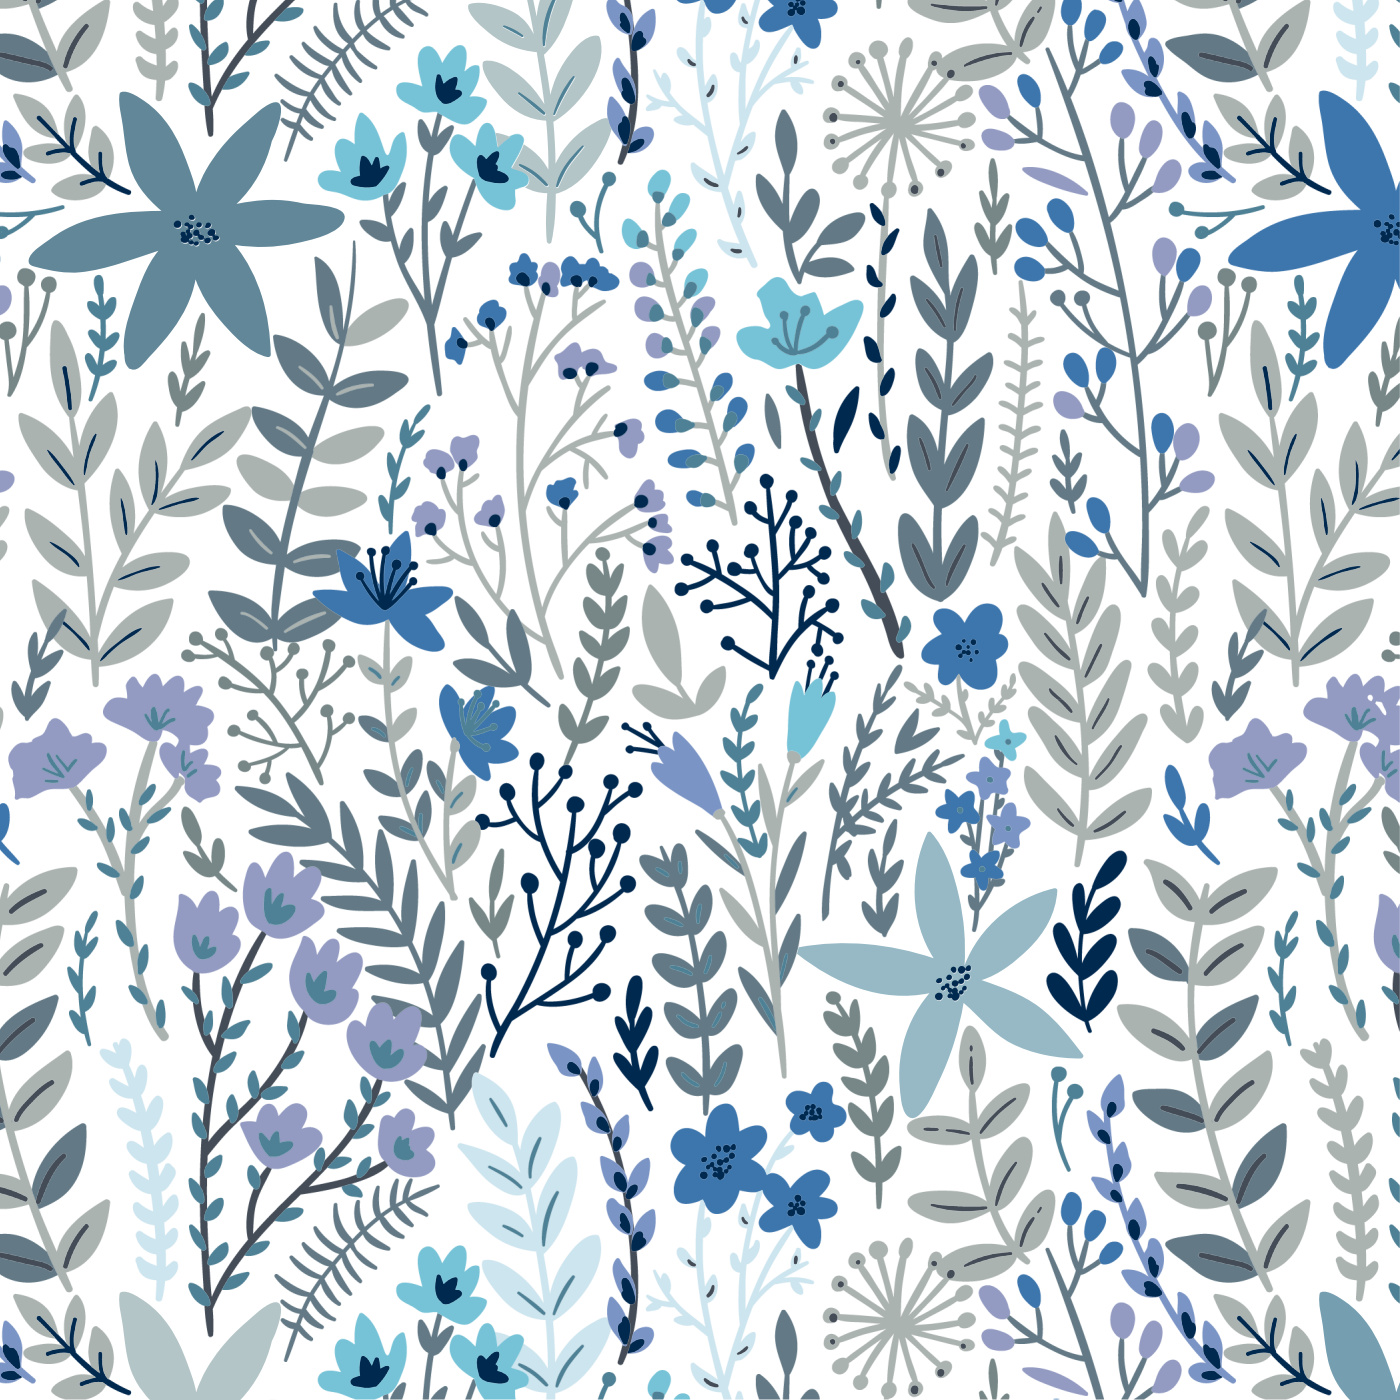 Whimsical Wildfield Wallpaper